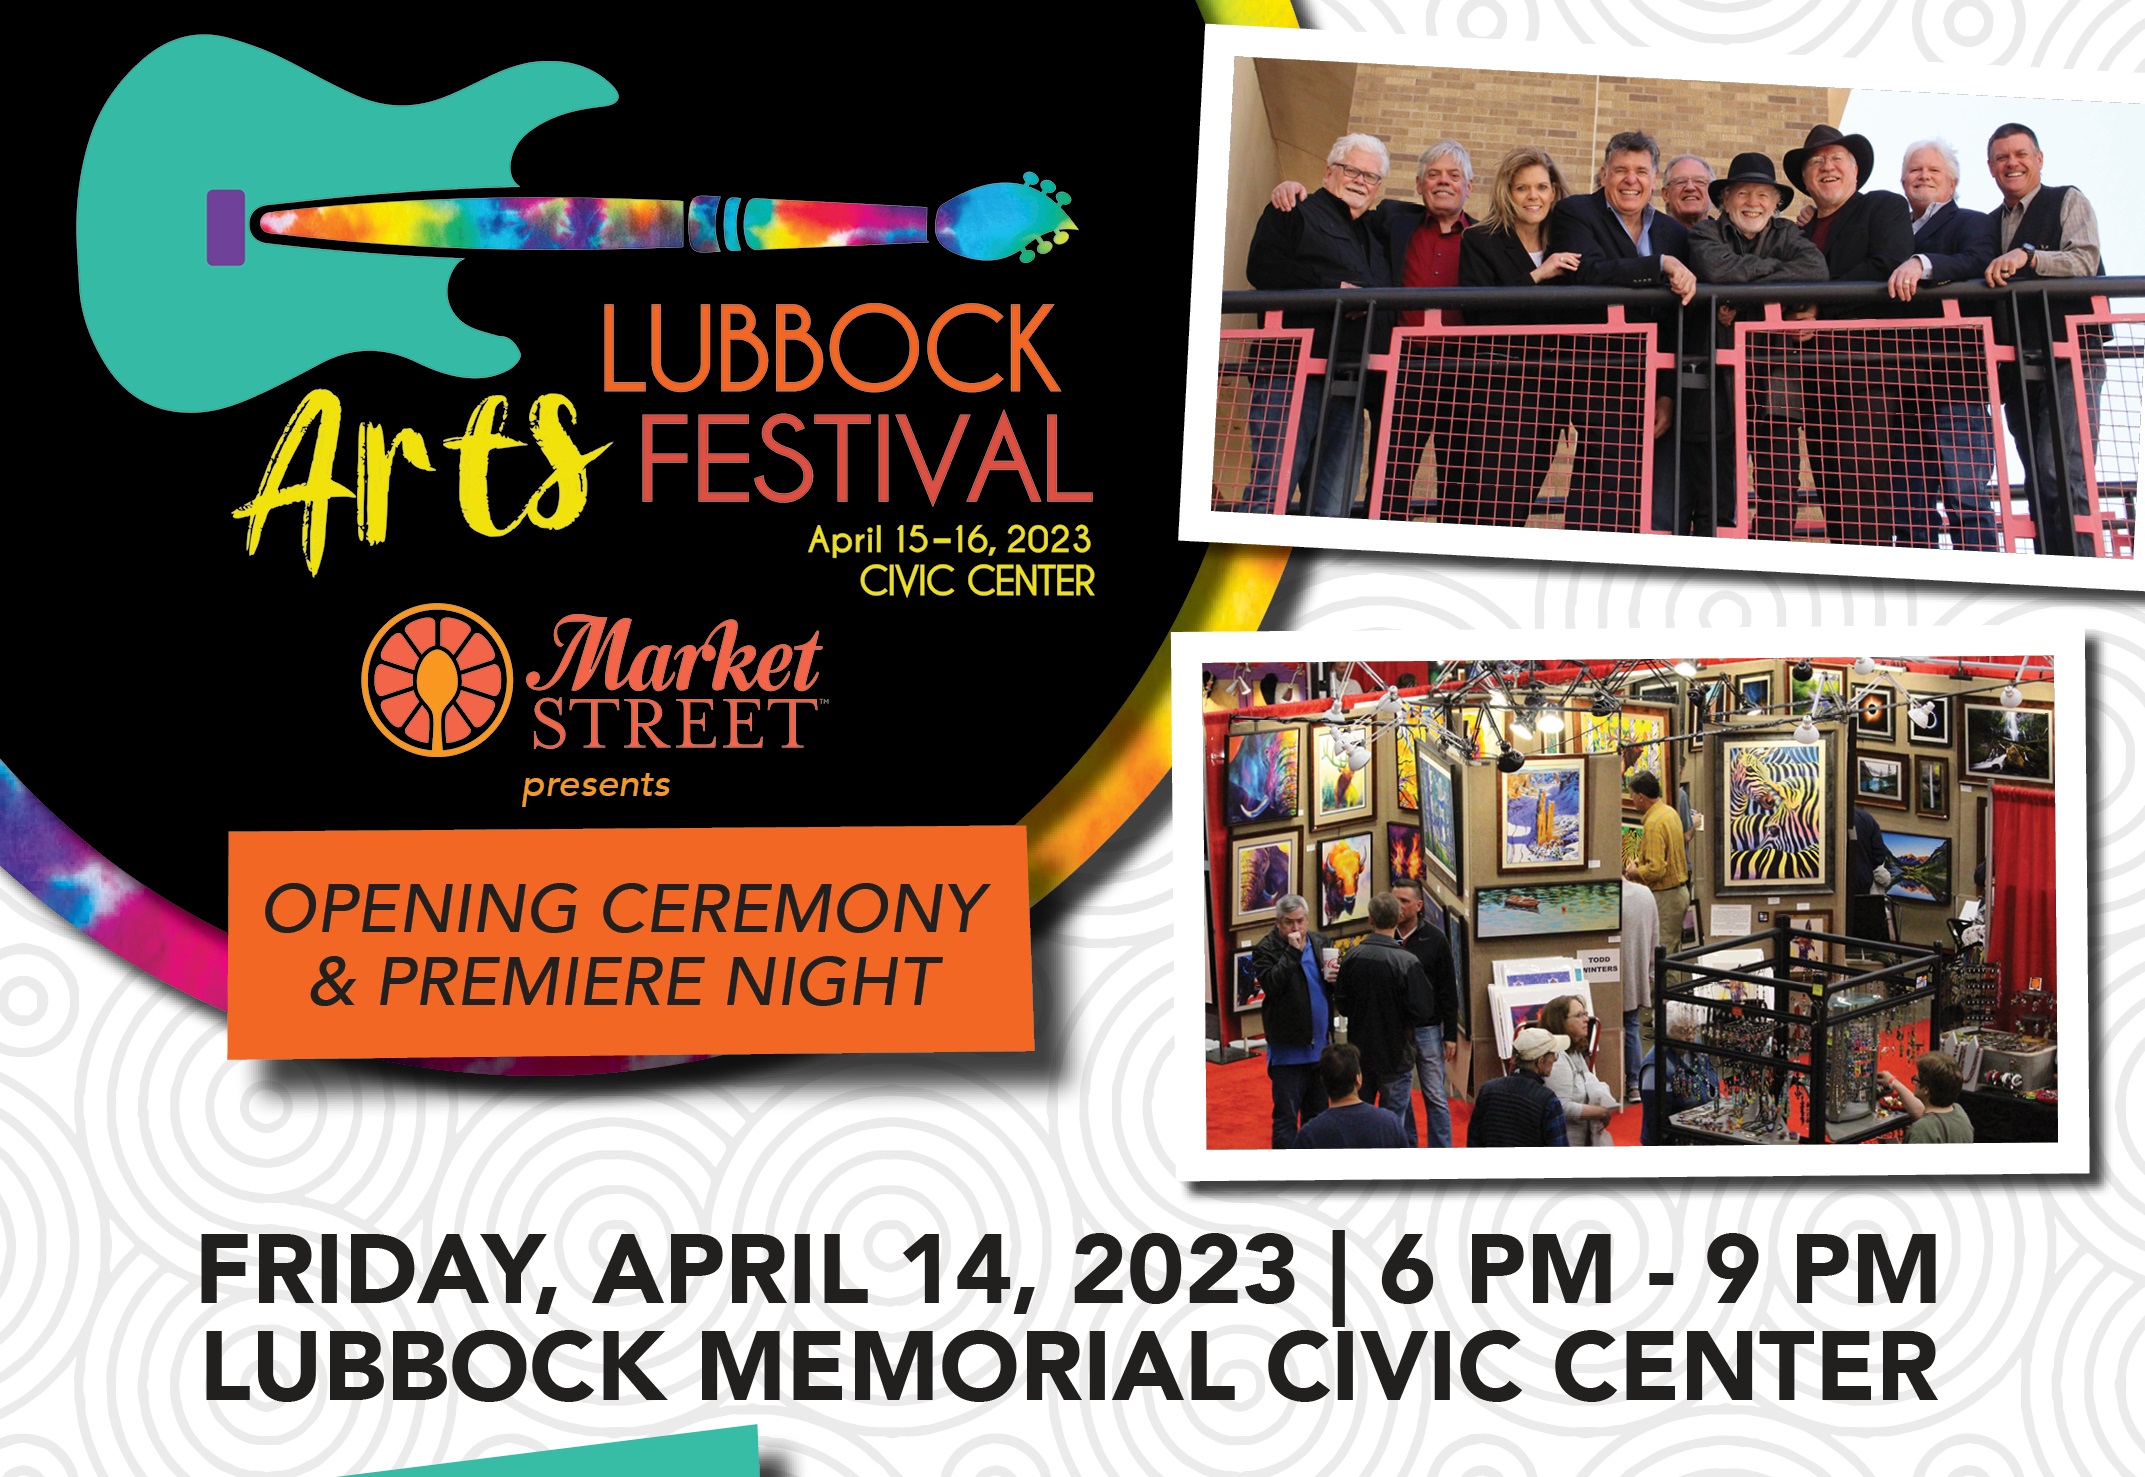 Opening Ceremony & Premiere Night at the 45th Annual Lubbock Arts